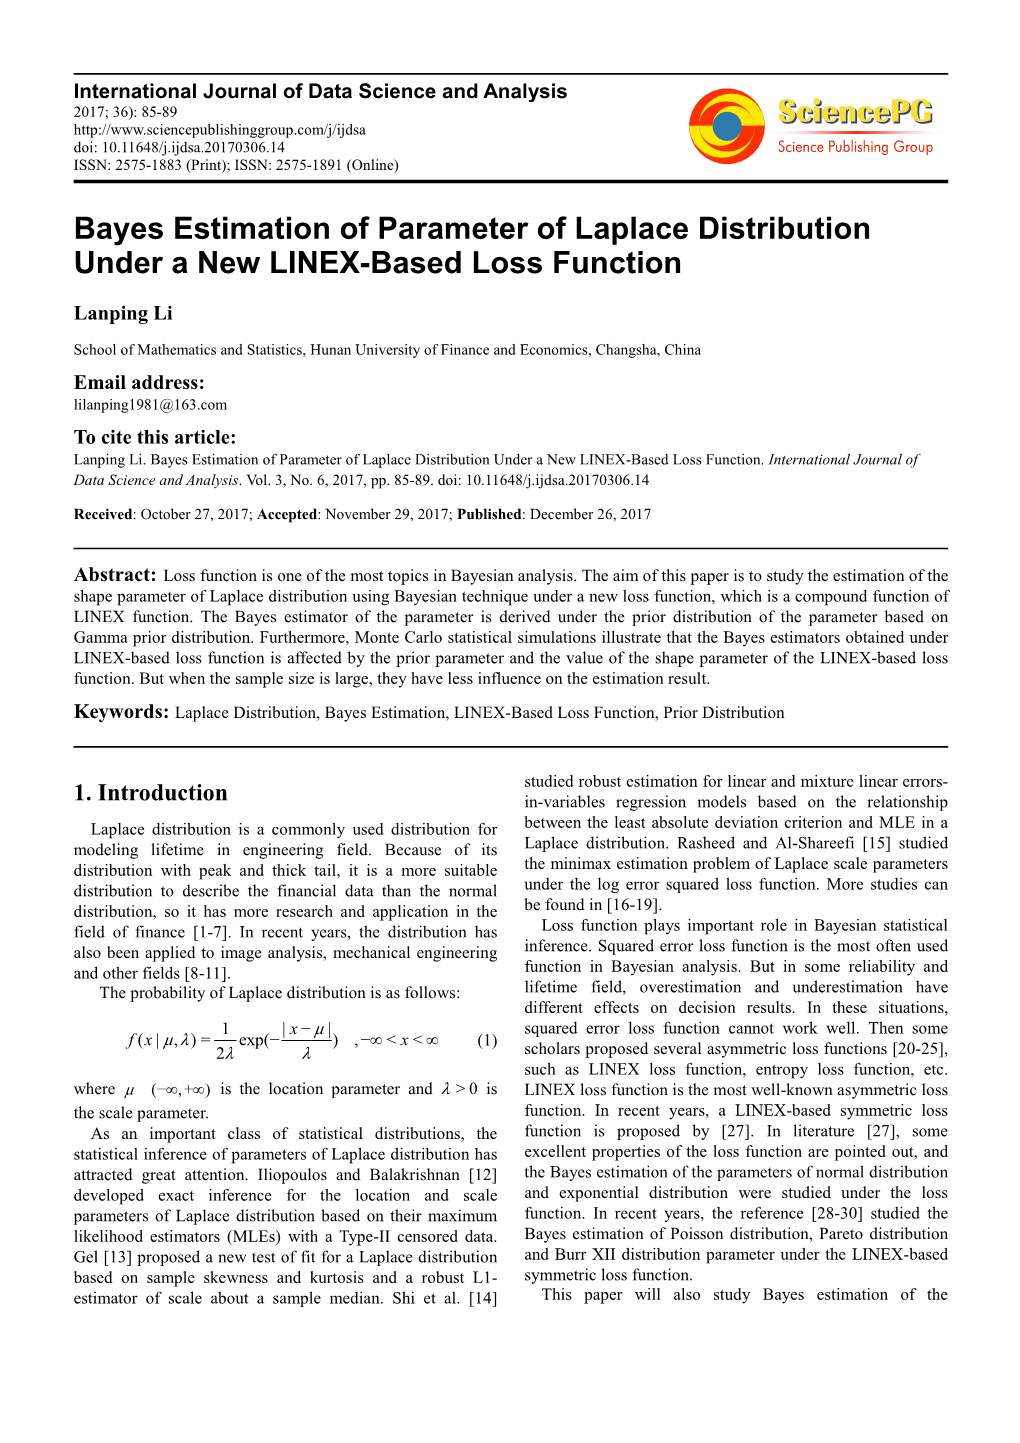 Bayes Estimation of Parameter of Laplace Distribution Under a New LINEX-Based Loss Function